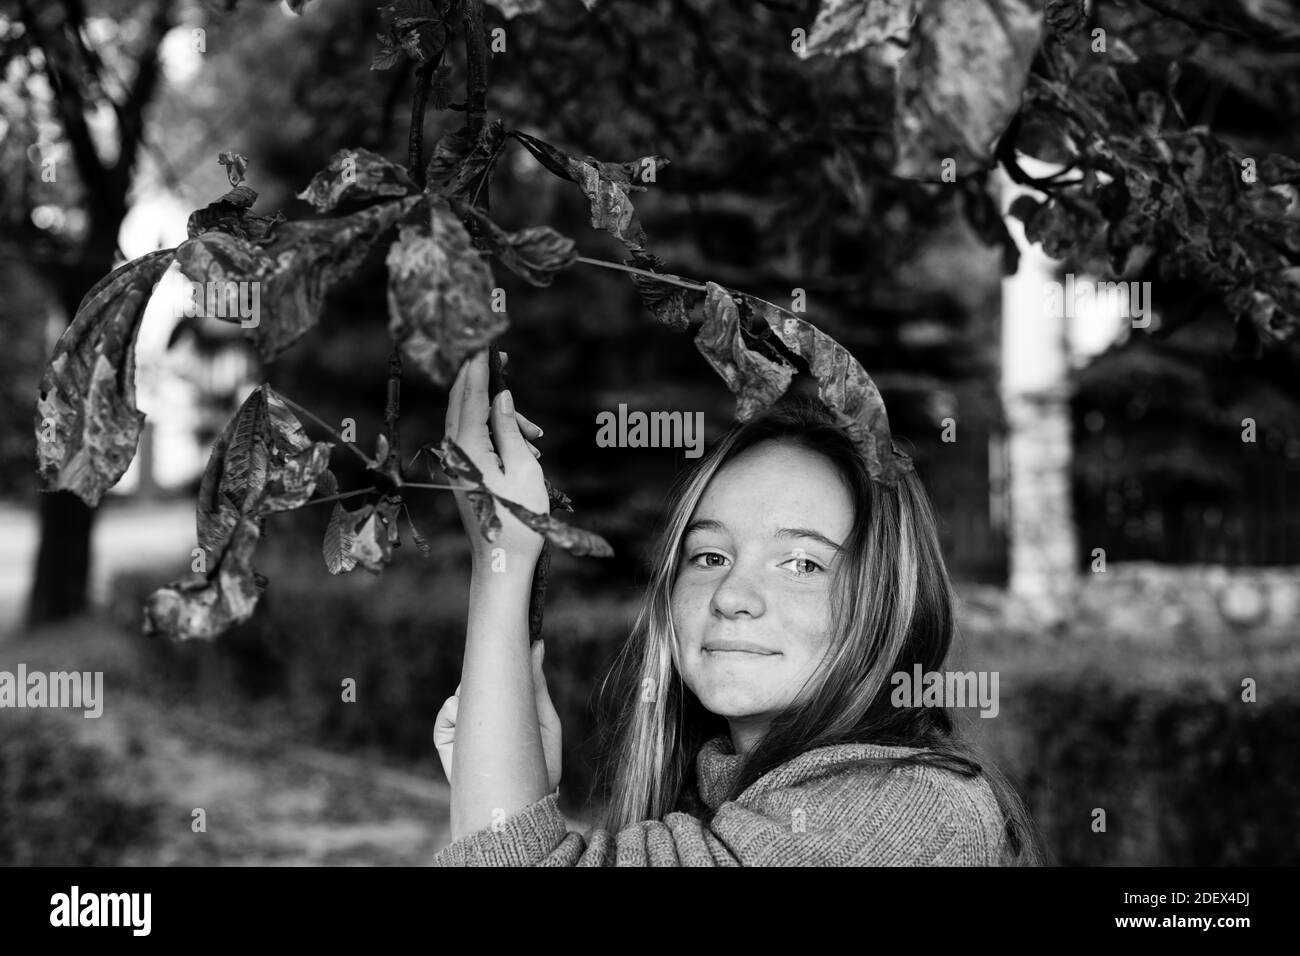 Portrait of young cute girl in autumn park. Black and white photo. Stock Photo